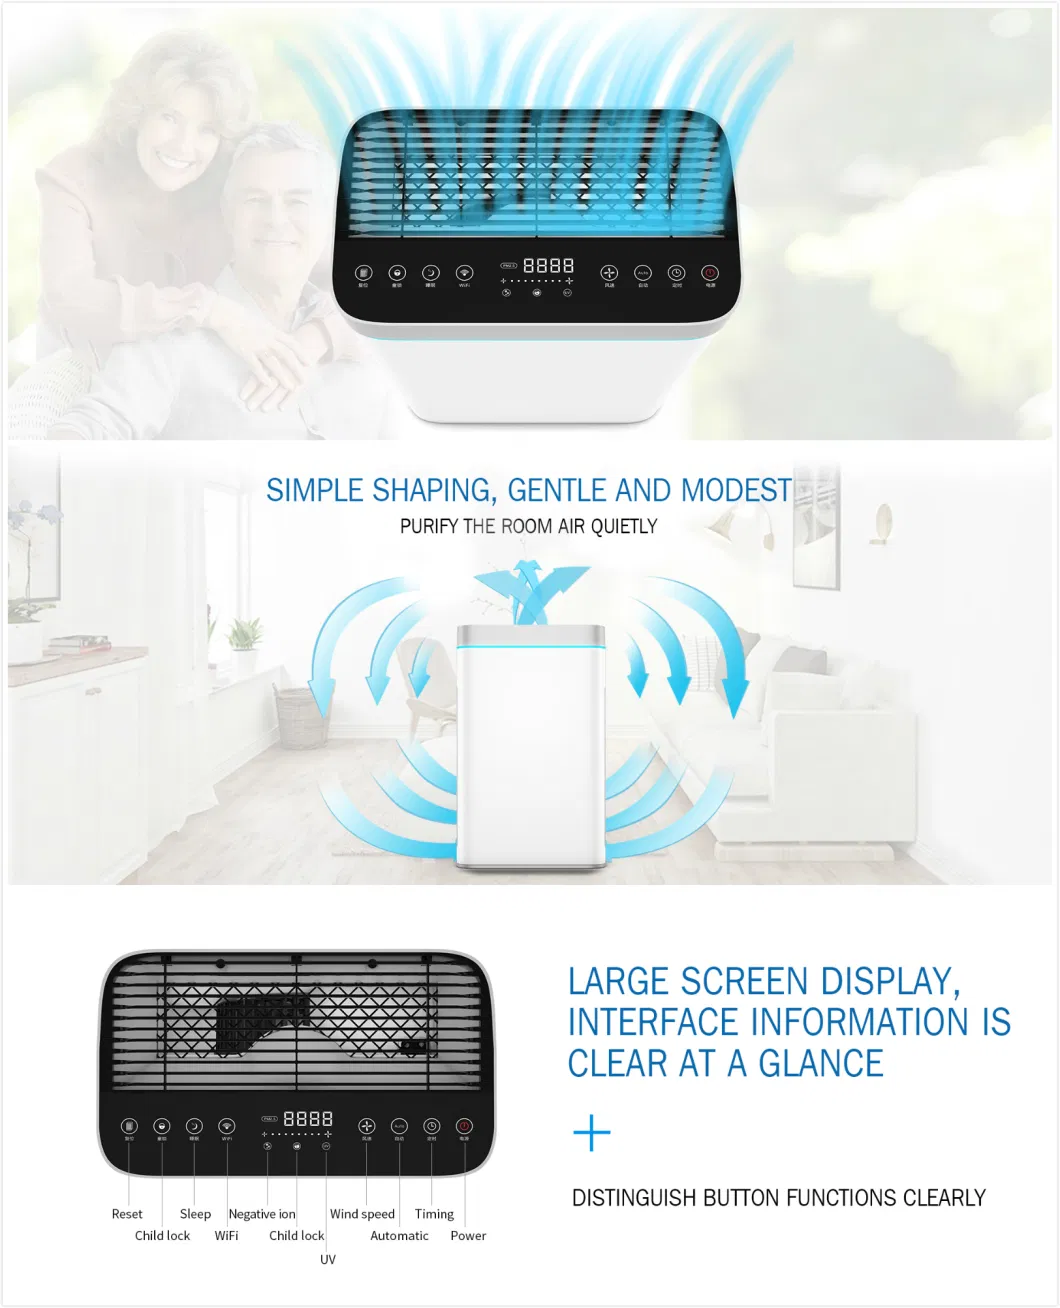 Household Air Purifier HEPA Filter Home Room Pm2.5 Dust Cleaner Smart WiFi Control Olansi